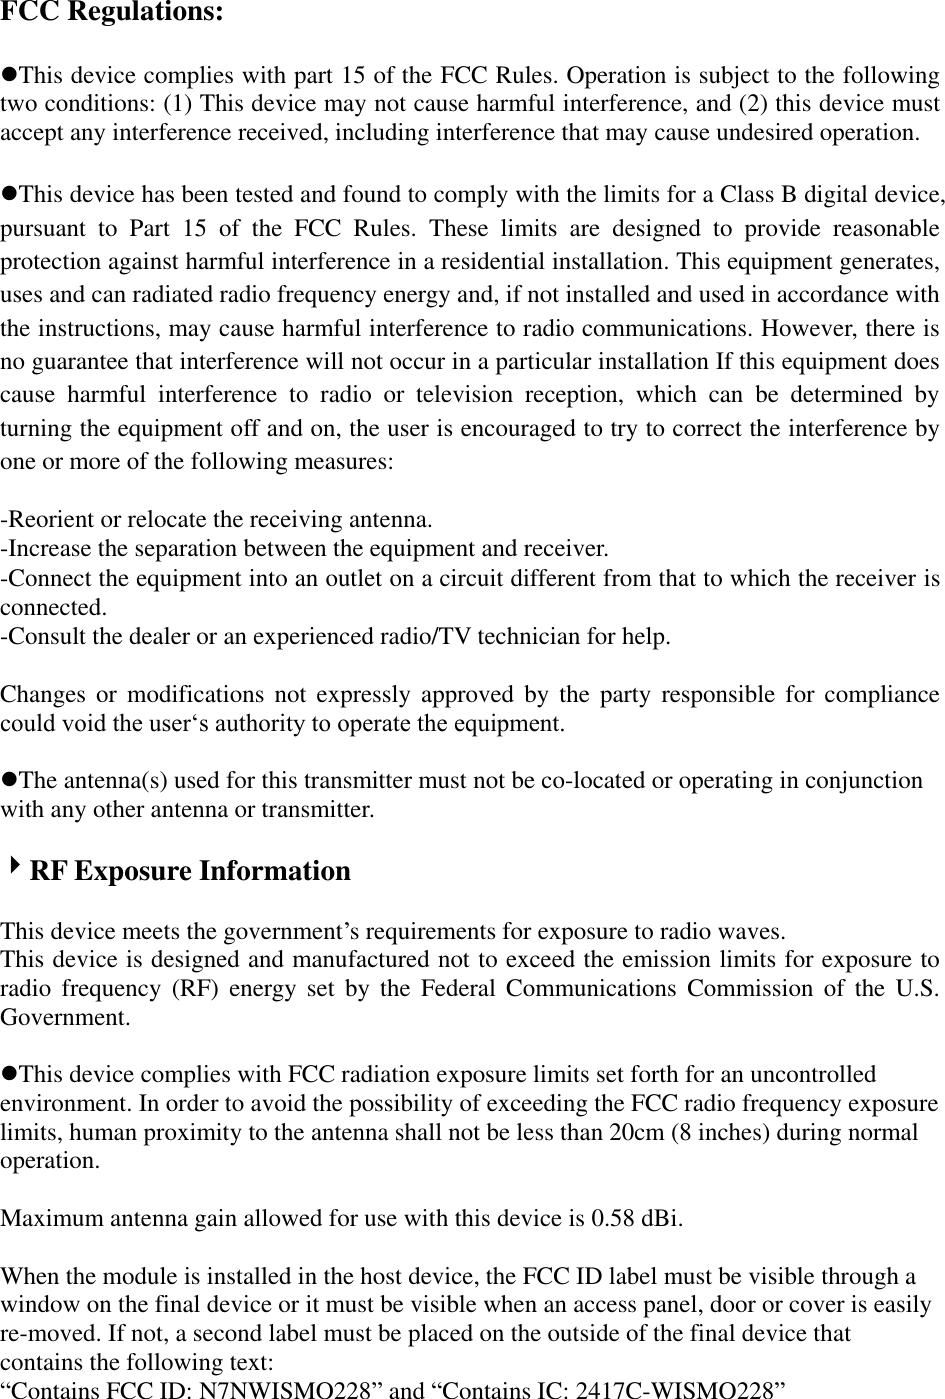 FCC Regulations:  This device complies with part 15 of the FCC Rules. Operation is subject to the following two conditions: (1) This device may not cause harmful interference, and (2) this device must accept any interference received, including interference that may cause undesired operation.  This device has been tested and found to comply with the limits for a Class B digital device, pursuant  to  Part  15  of  the  FCC  Rules.  These  limits  are  designed  to  provide  reasonable protection against harmful interference in a residential installation. This equipment generates, uses and can radiated radio frequency energy and, if not installed and used in accordance with the instructions, may cause harmful interference to radio communications. However, there is no guarantee that interference will not occur in a particular installation If this equipment does cause  harmful  interference  to  radio  or  television  reception,  which  can  be  determined  by turning the equipment off and on, the user is encouraged to try to correct the interference by one or more of the following measures:  -Reorient or relocate the receiving antenna. -Increase the separation between the equipment and receiver. -Connect the equipment into an outlet on a circuit different from that to which the receiver is connected. -Consult the dealer or an experienced radio/TV technician for help.  Changes  or  modifications not expressly approved by the party responsible for compliance could void the user„s authority to operate the equipment.  The antenna(s) used for this transmitter must not be co-located or operating in conjunction with any other antenna or transmitter.  RF Exposure Information  This device meets the government‟s requirements for exposure to radio waves. This device is designed and manufactured not to exceed the emission limits for exposure to radio  frequency  (RF)  energy  set  by  the  Federal  Communications  Commission  of  the  U.S. Government.  This device complies with FCC radiation exposure limits set forth for an uncontrolled environment. In order to avoid the possibility of exceeding the FCC radio frequency exposure limits, human proximity to the antenna shall not be less than 20cm (8 inches) during normal operation.  Maximum antenna gain allowed for use with this device is 0.58 dBi.  When the module is installed in the host device, the FCC ID label must be visible through a window on the final device or it must be visible when an access panel, door or cover is easily re-moved. If not, a second label must be placed on the outside of the final device that contains the following text:   “Contains FCC ID: N7NWISMO228” and “Contains IC: 2417C-WISMO228” 